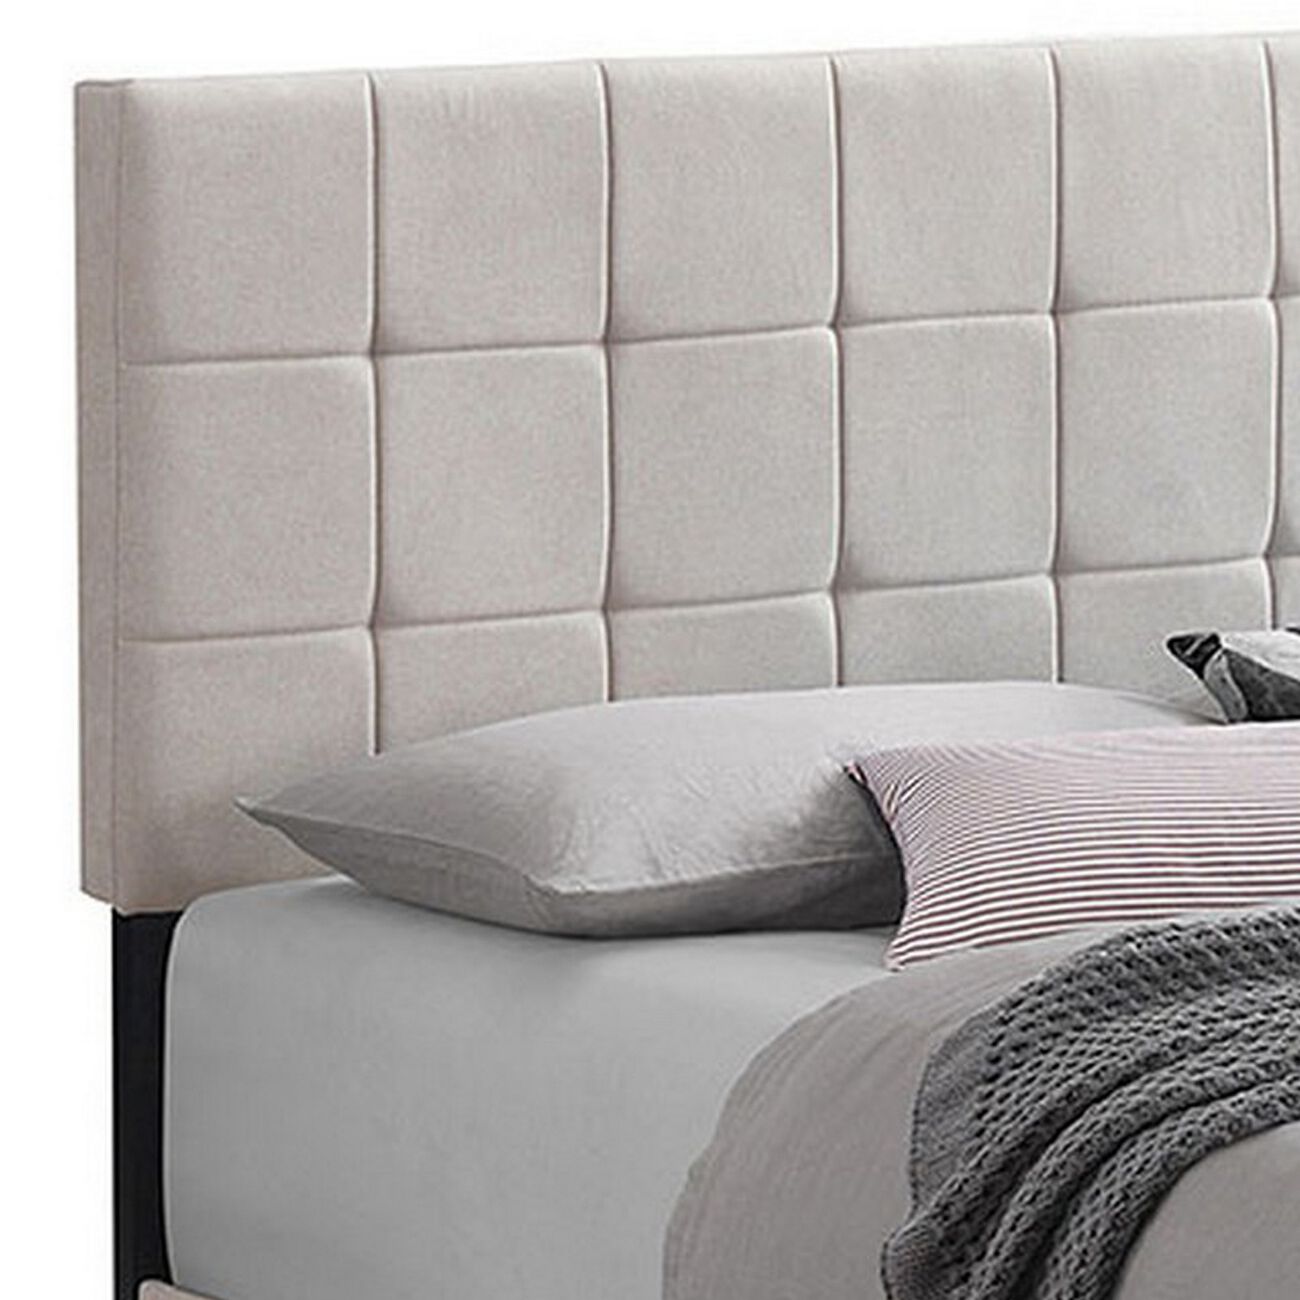 Grid Tufted Fabric Upholstered Queen Bed, Beige